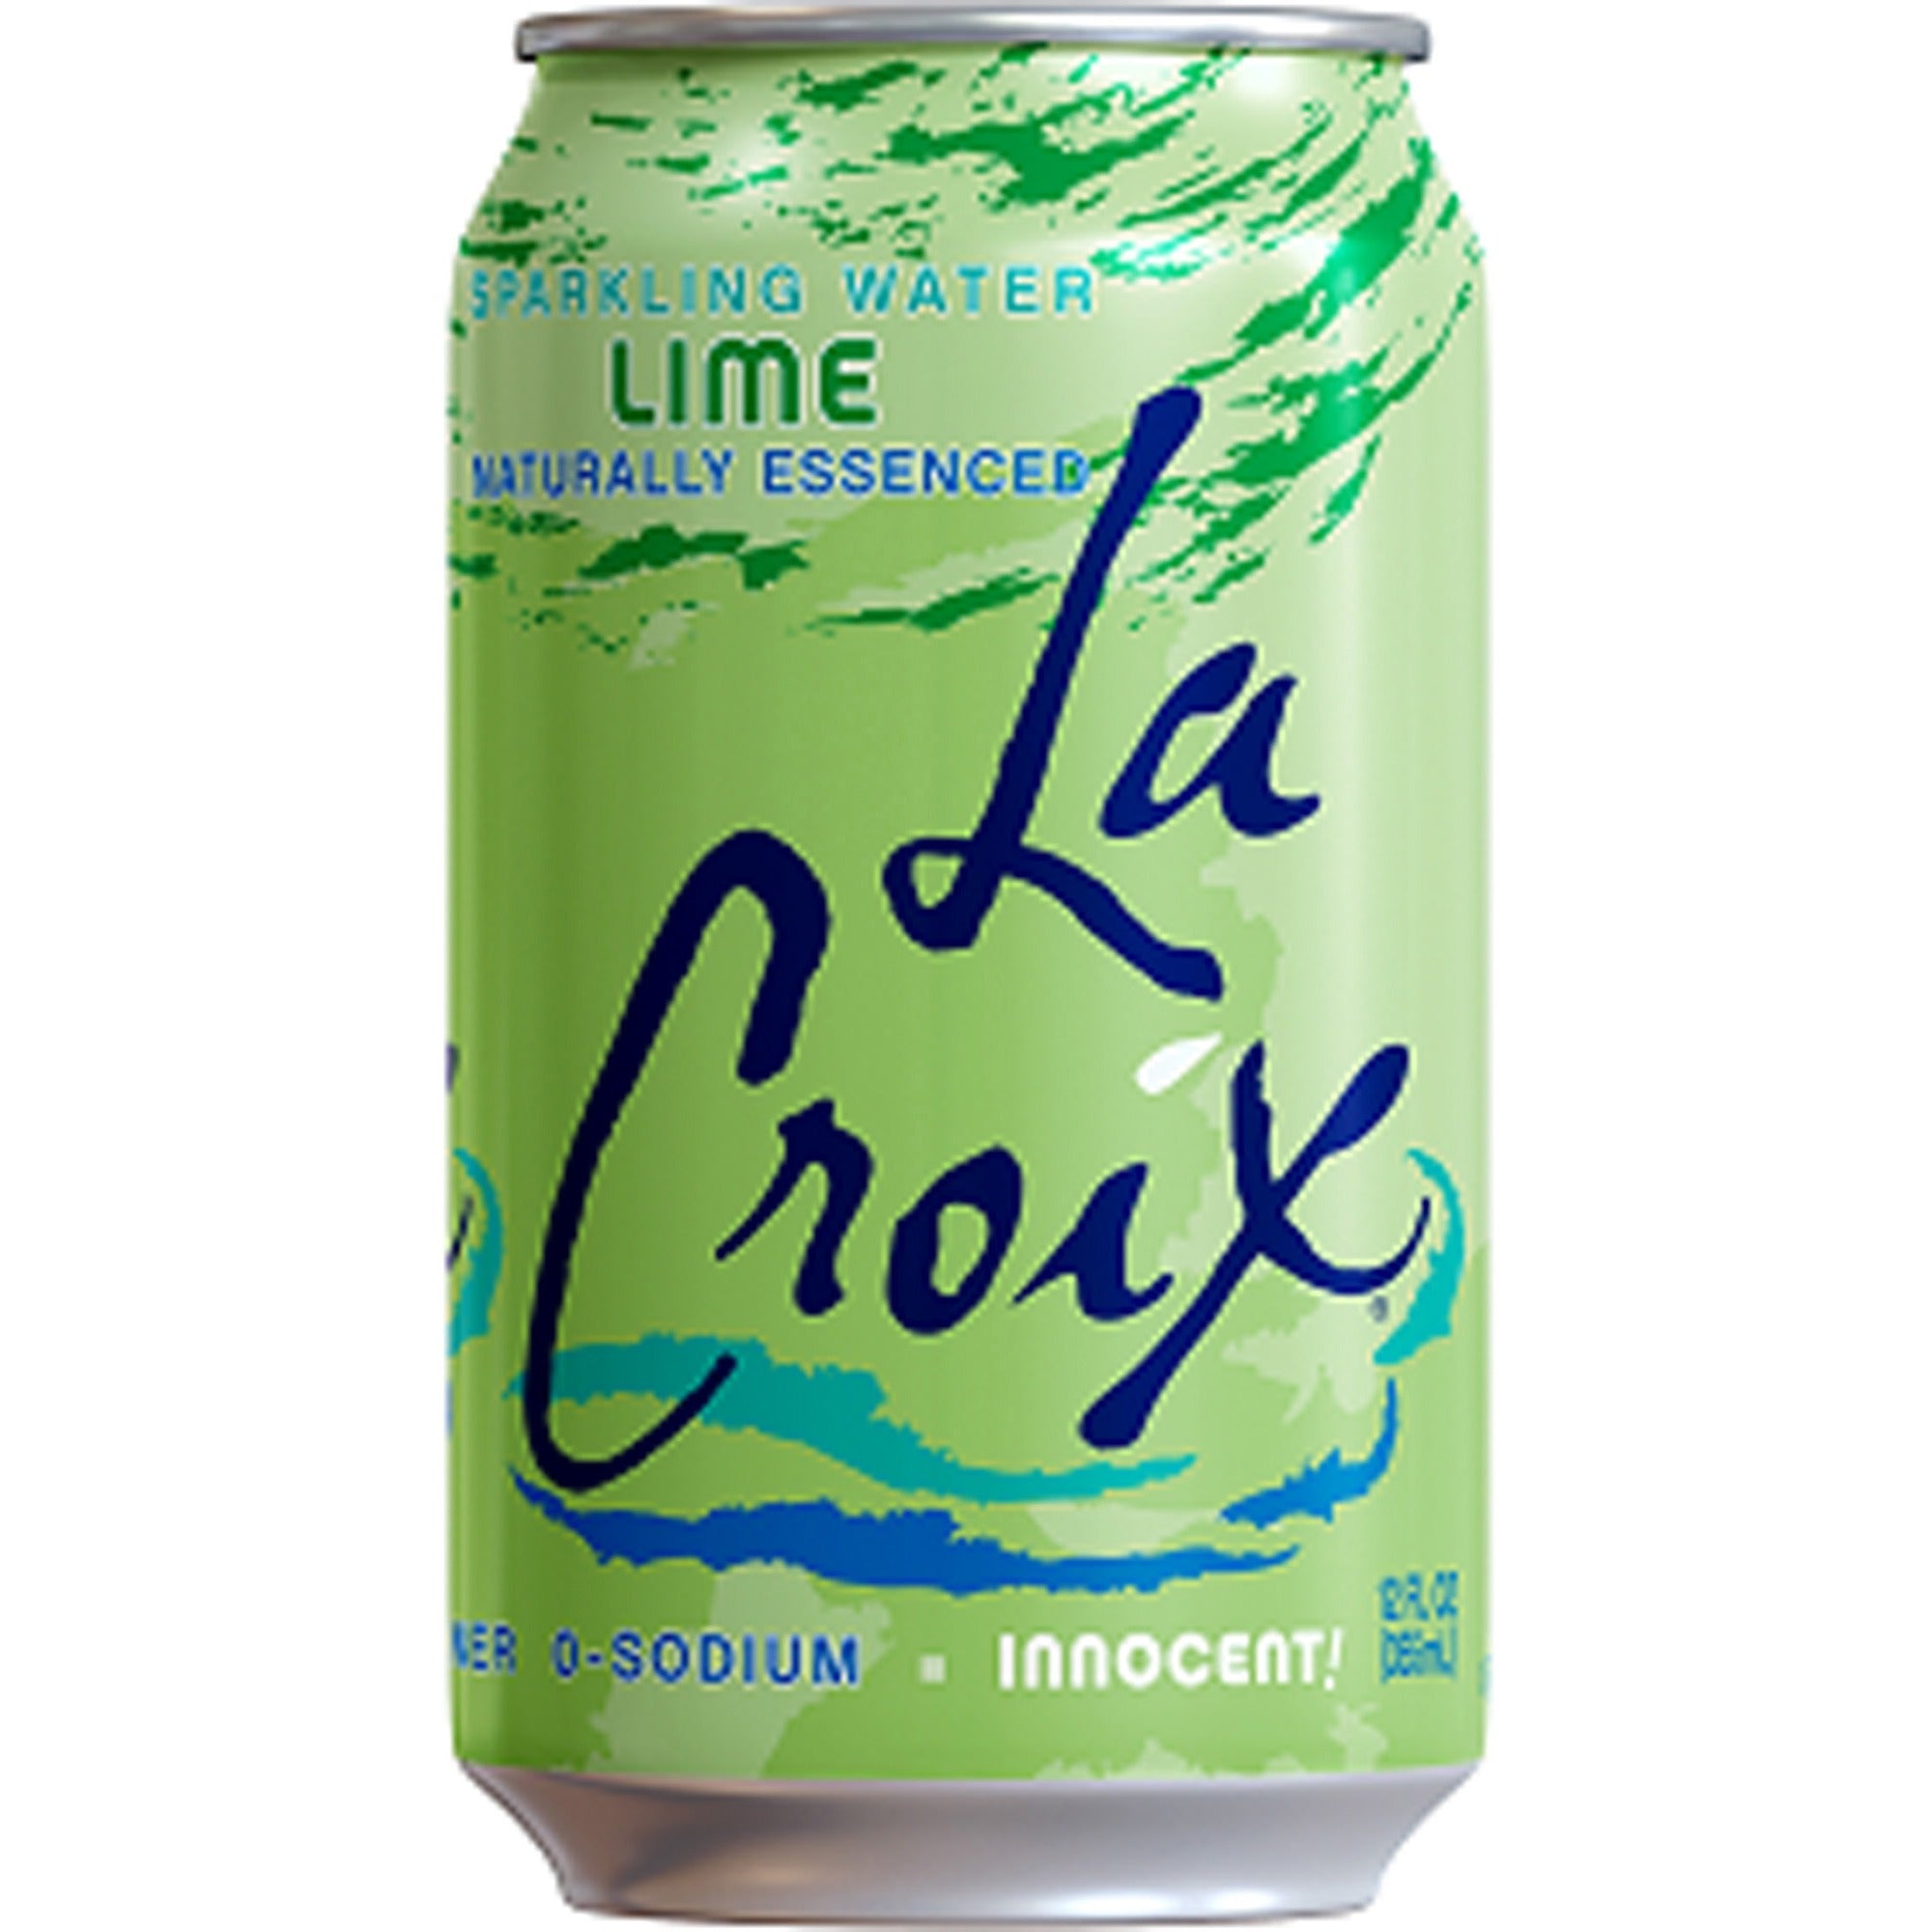 lacroix-lemon-lime-and-grapefruit-flavored-sparkling-water-ready-to-drink-12-fl-oz-355-ml-2-carton-can_lcx81237 - 2